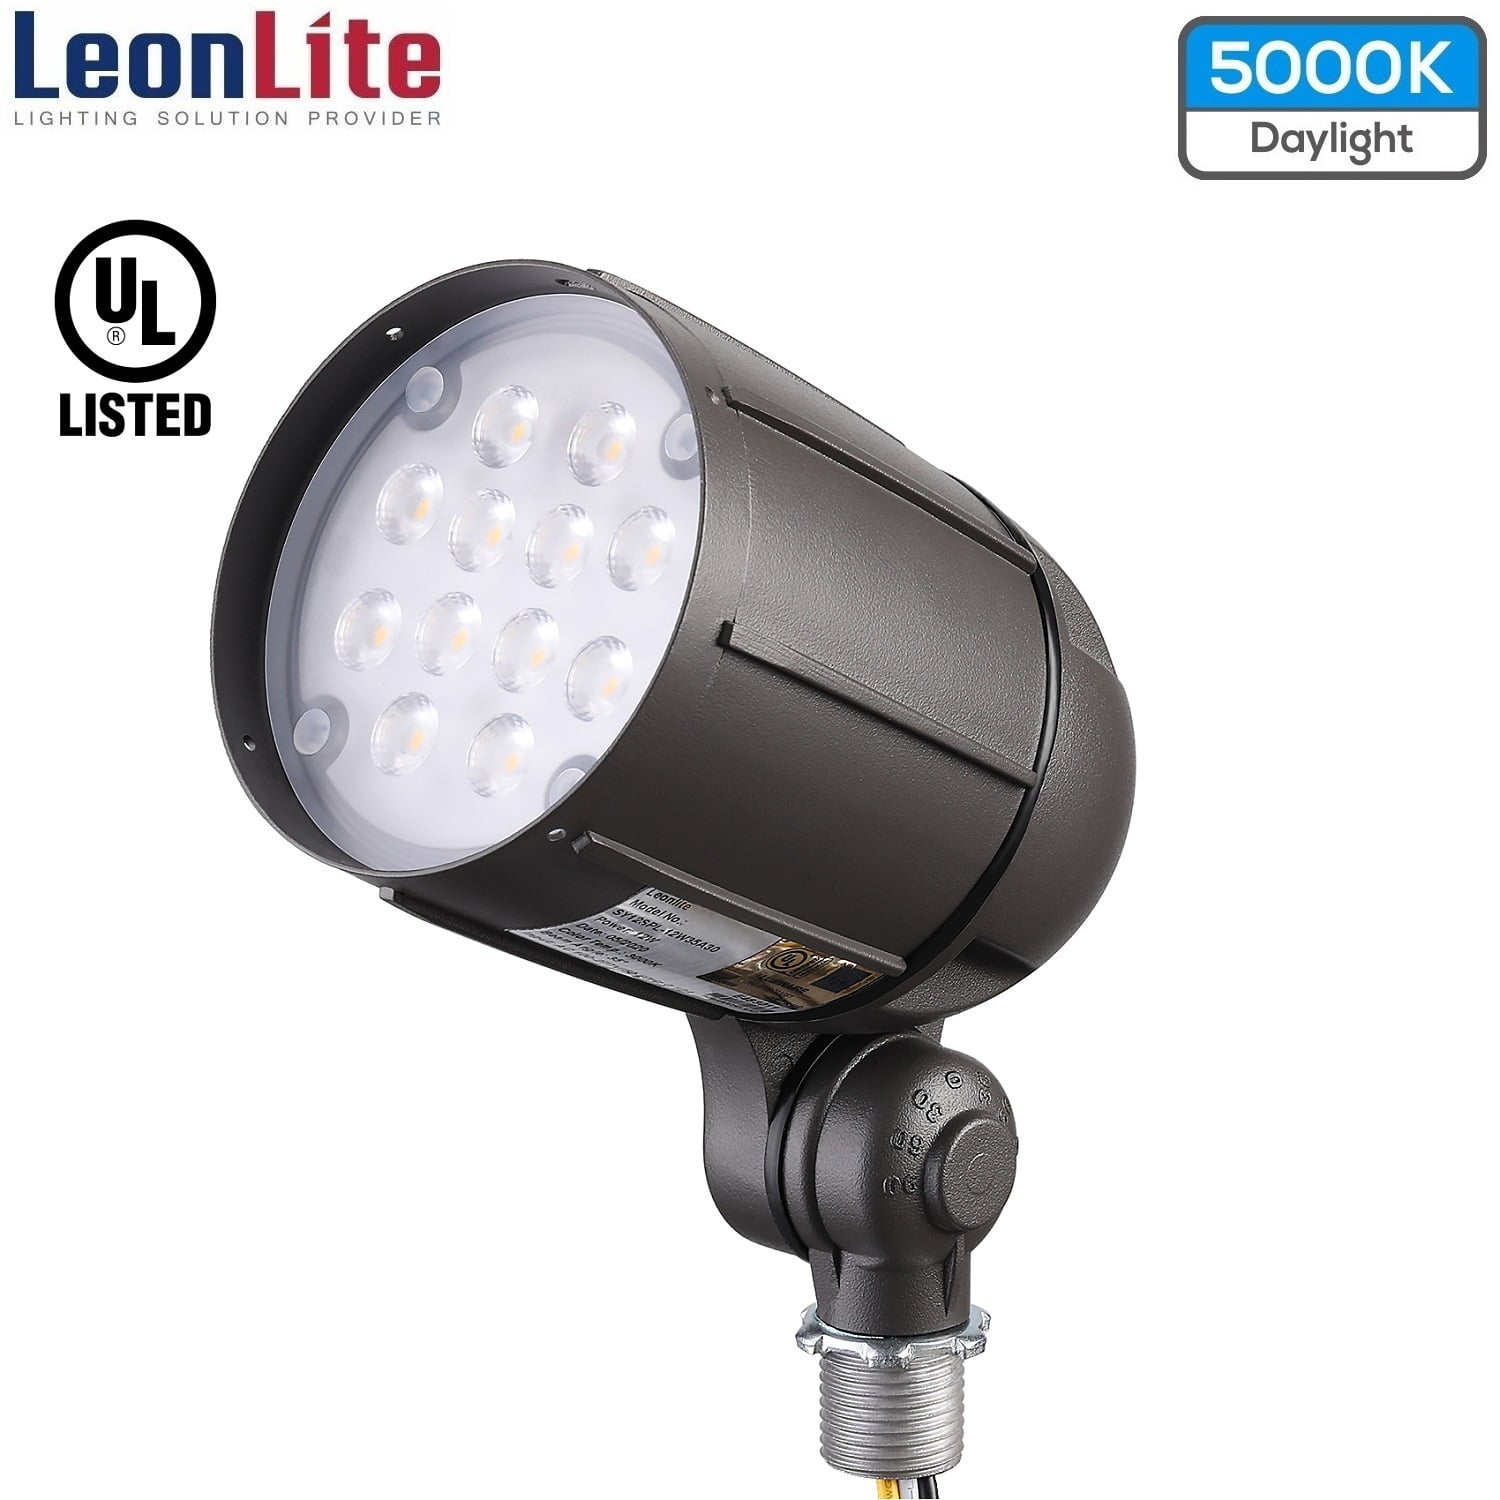 Details about   LED 7th Generation Flood Light Waterproof Outdoor Security Spotlight Lighting 